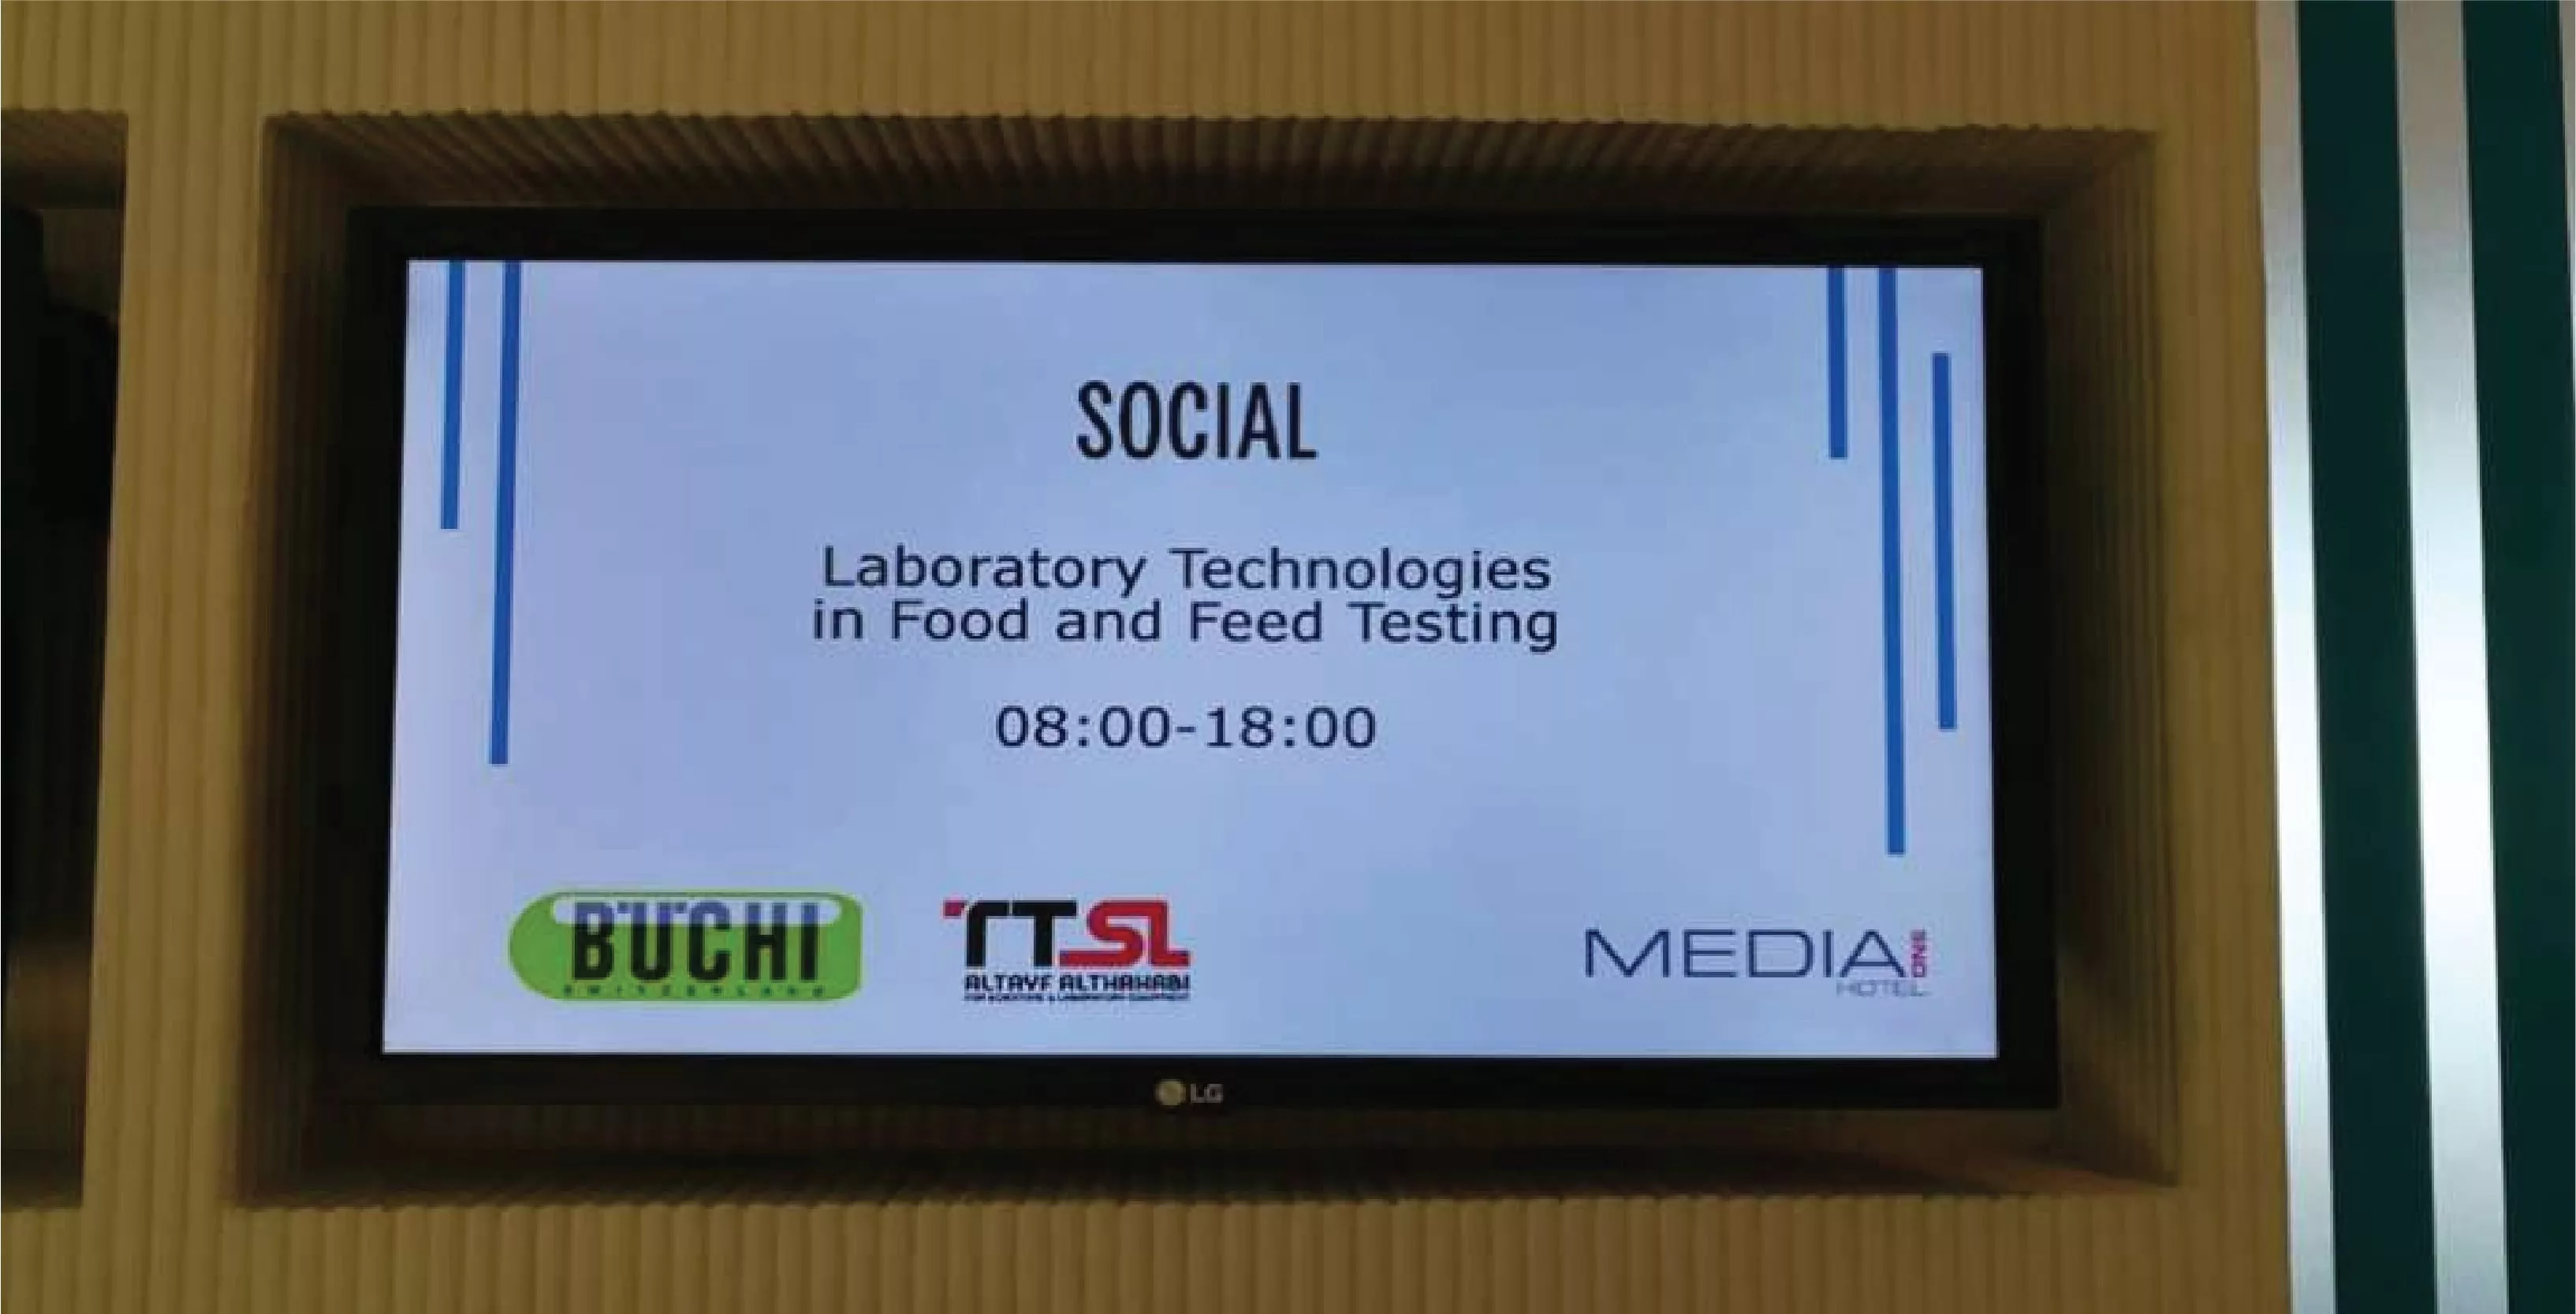 Latest Laboratory Technologies in Food and Feed Testing Seminar